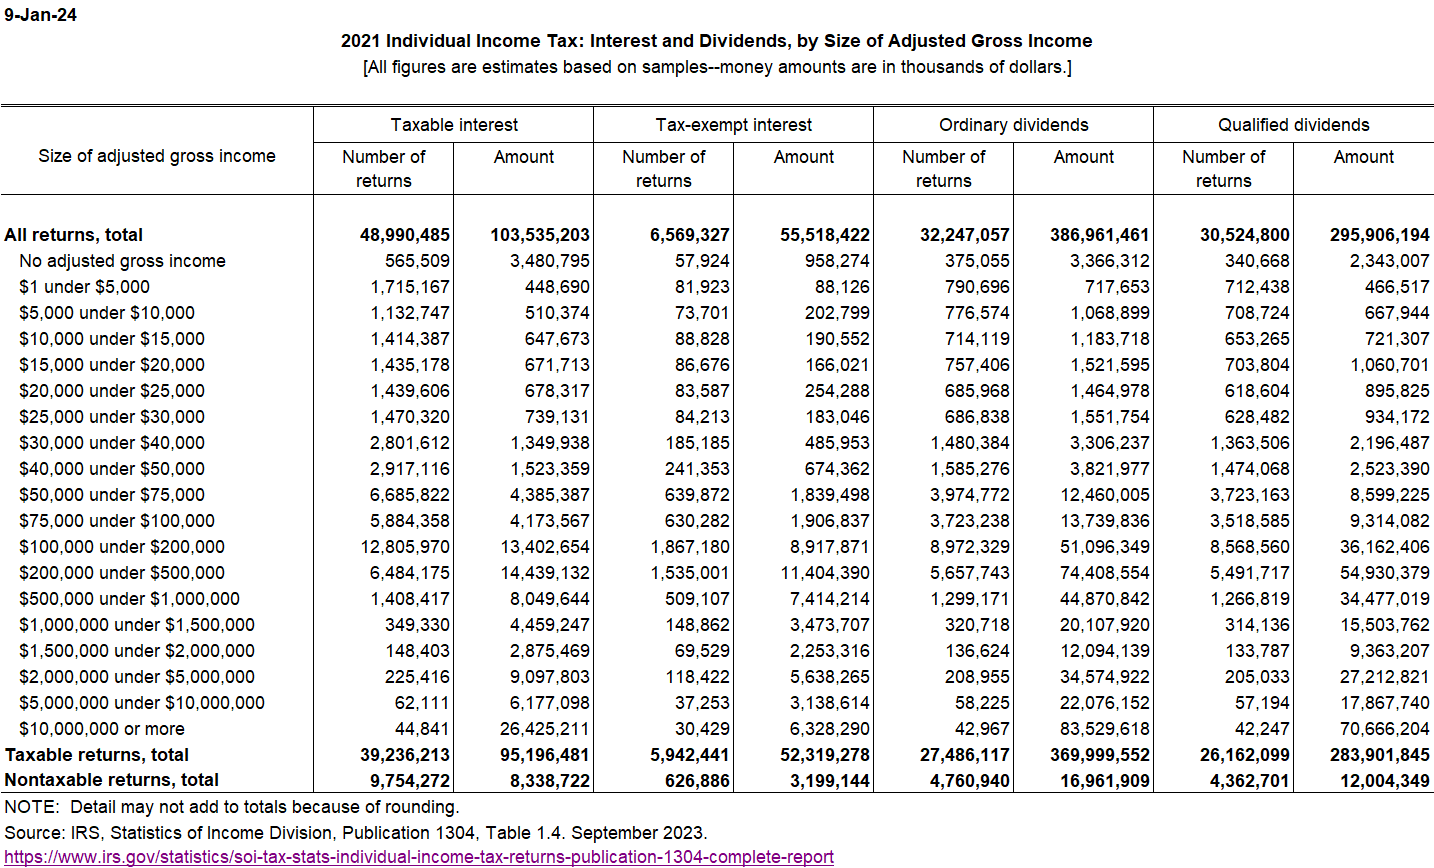 2021 Individual Income Tax: Interest and Dividends, by Size of Adjusted Gross Income